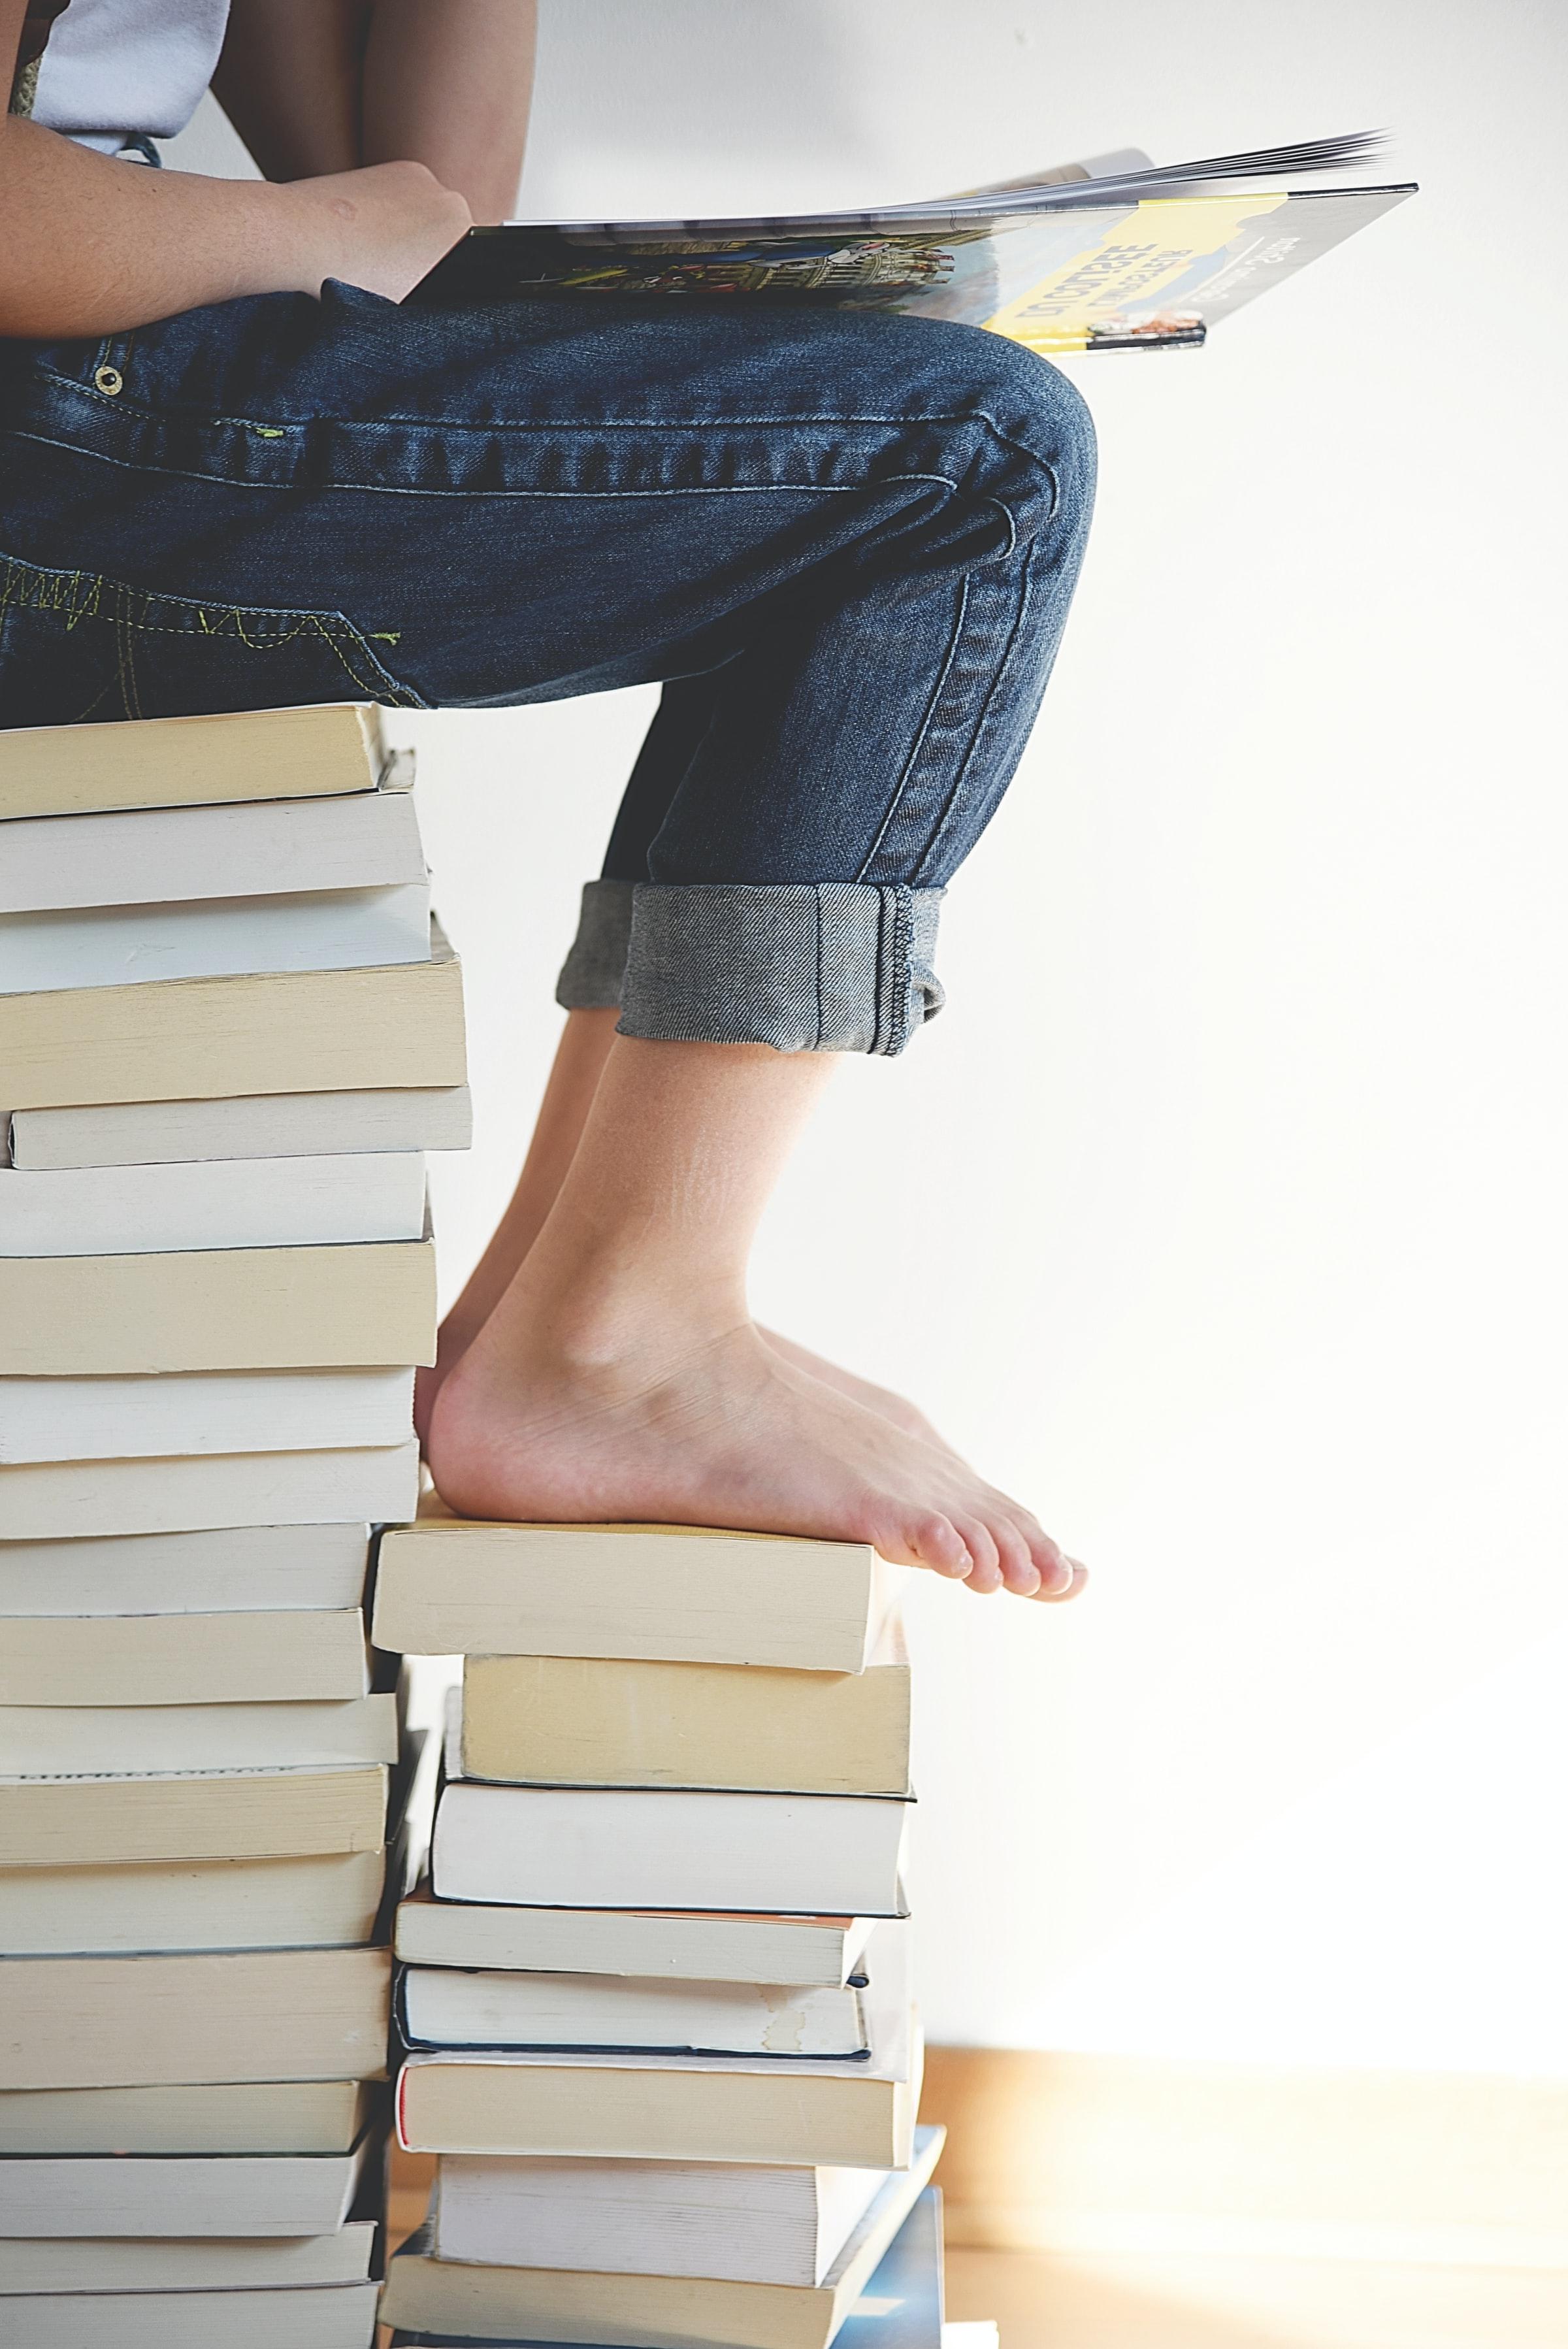 Person sitting on a pile of books